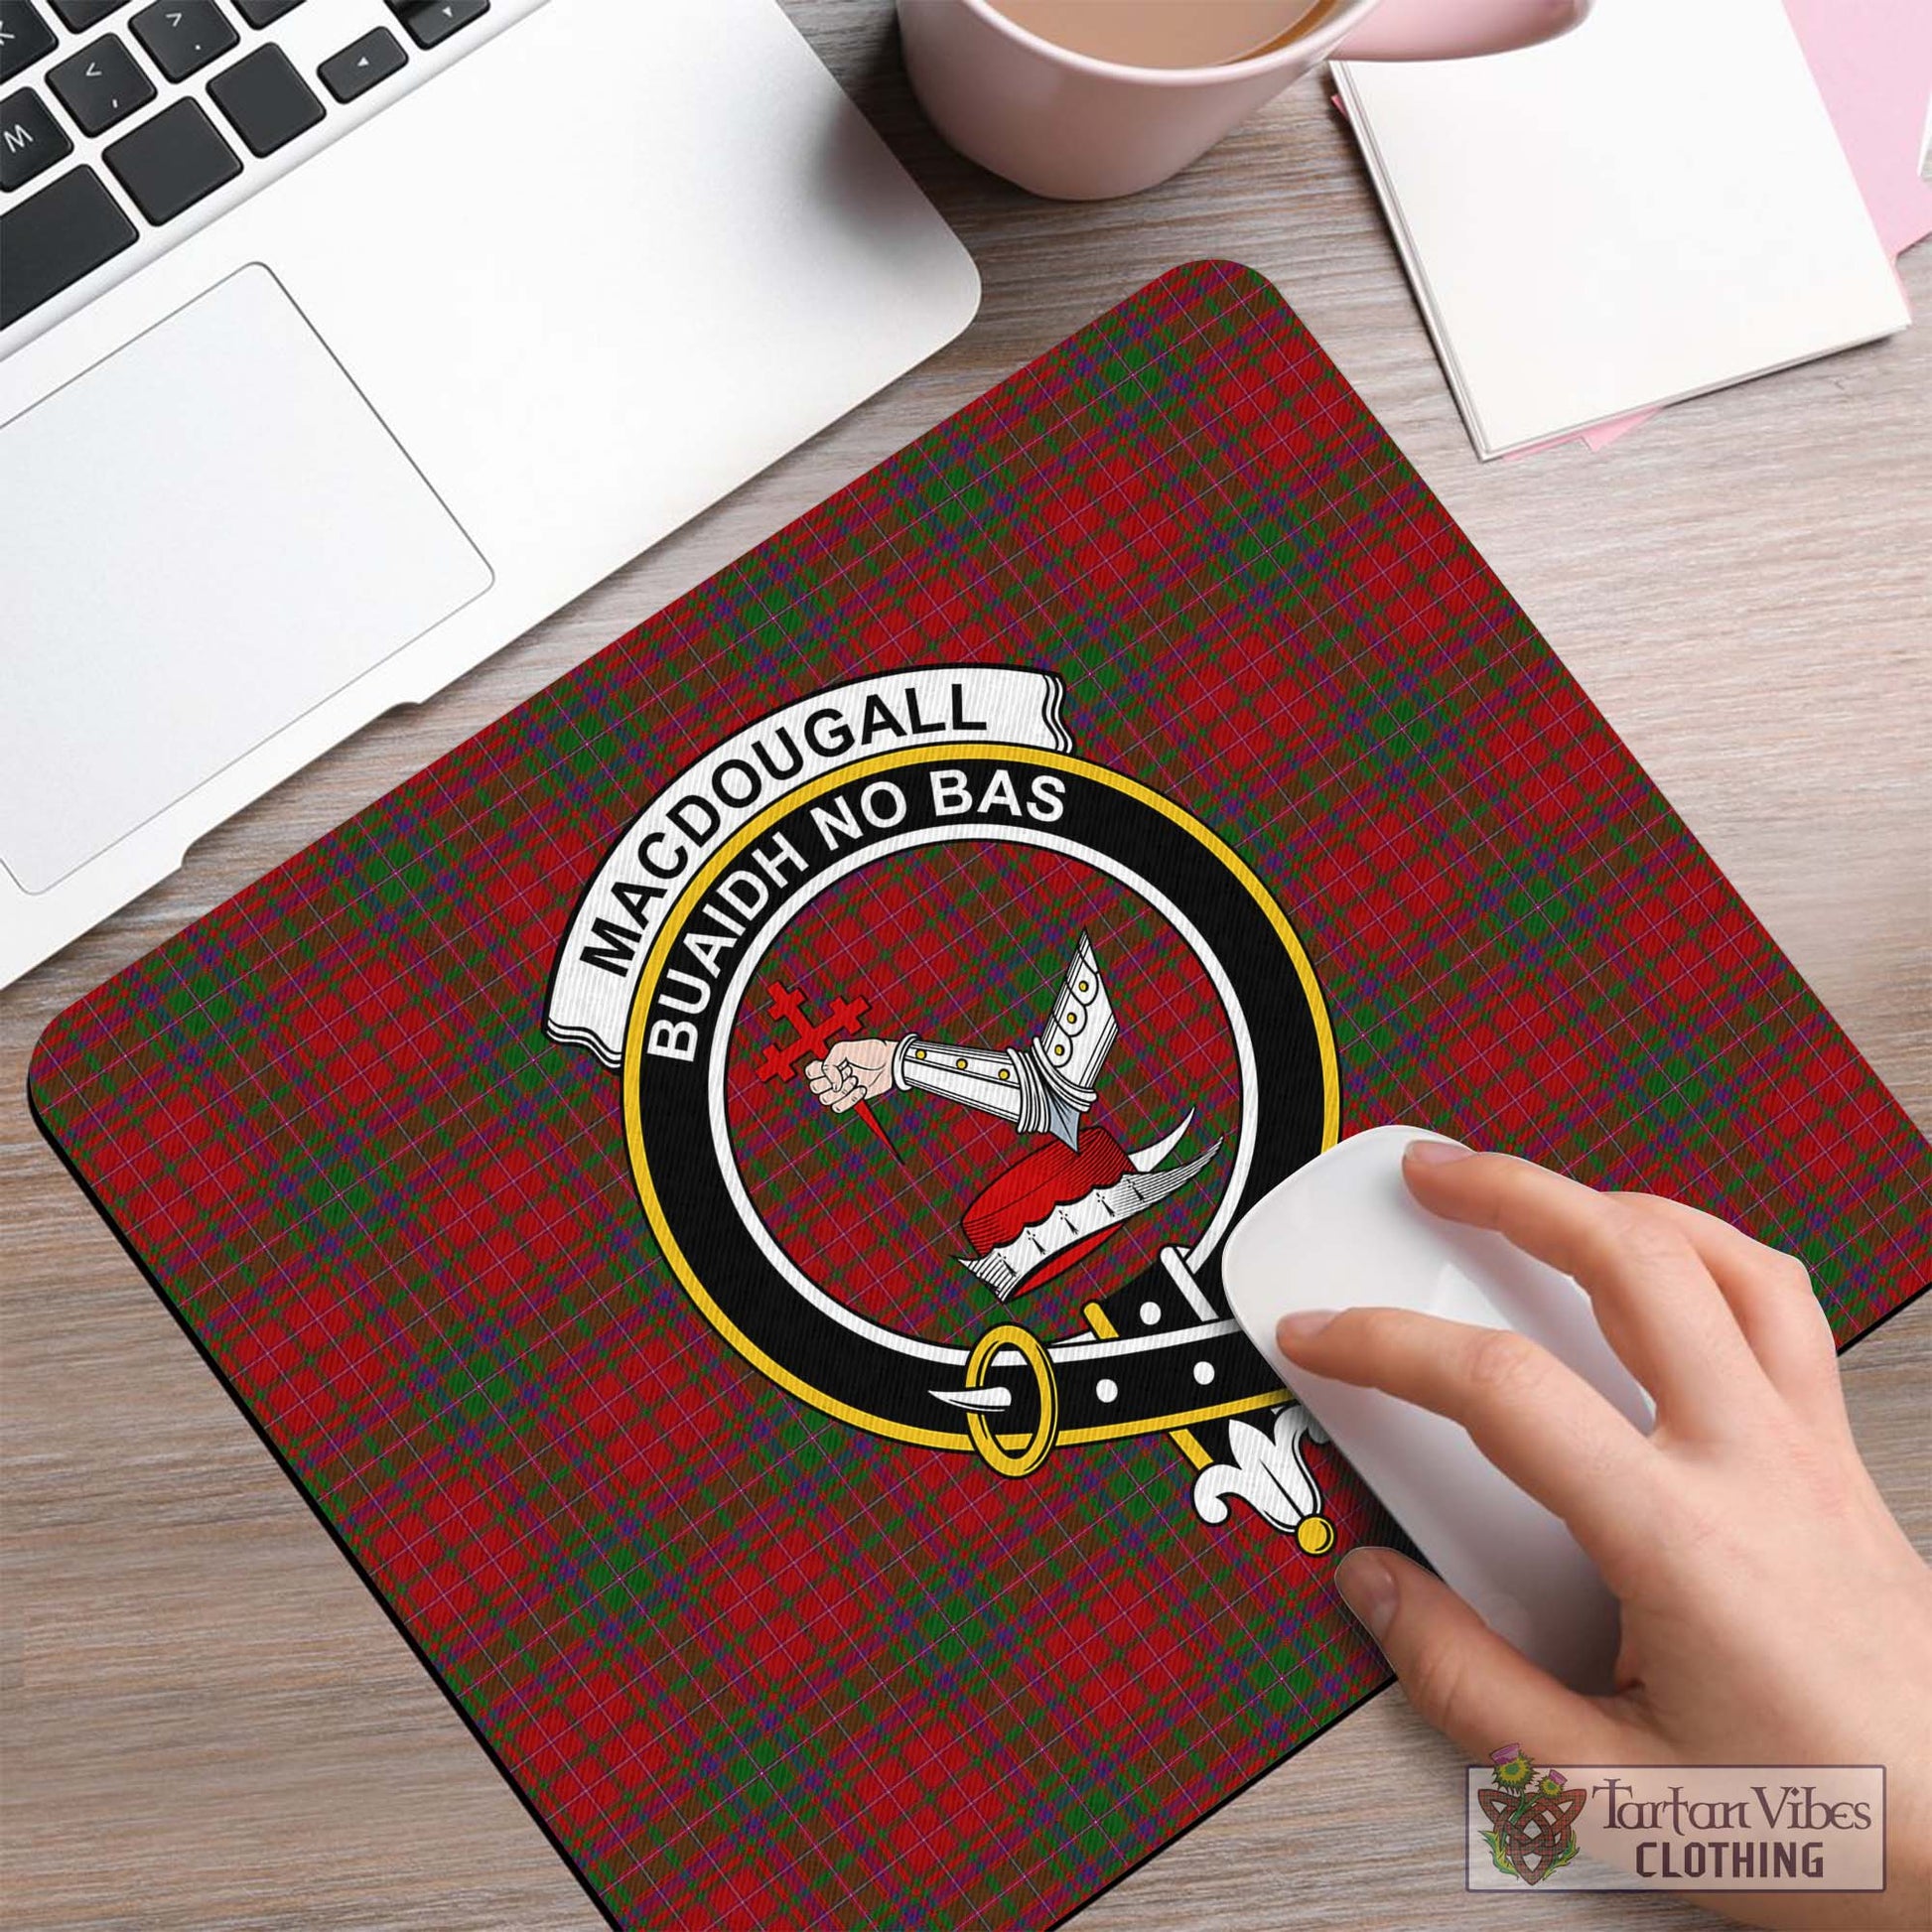 Tartan Vibes Clothing MacDougall Tartan Mouse Pad with Family Crest